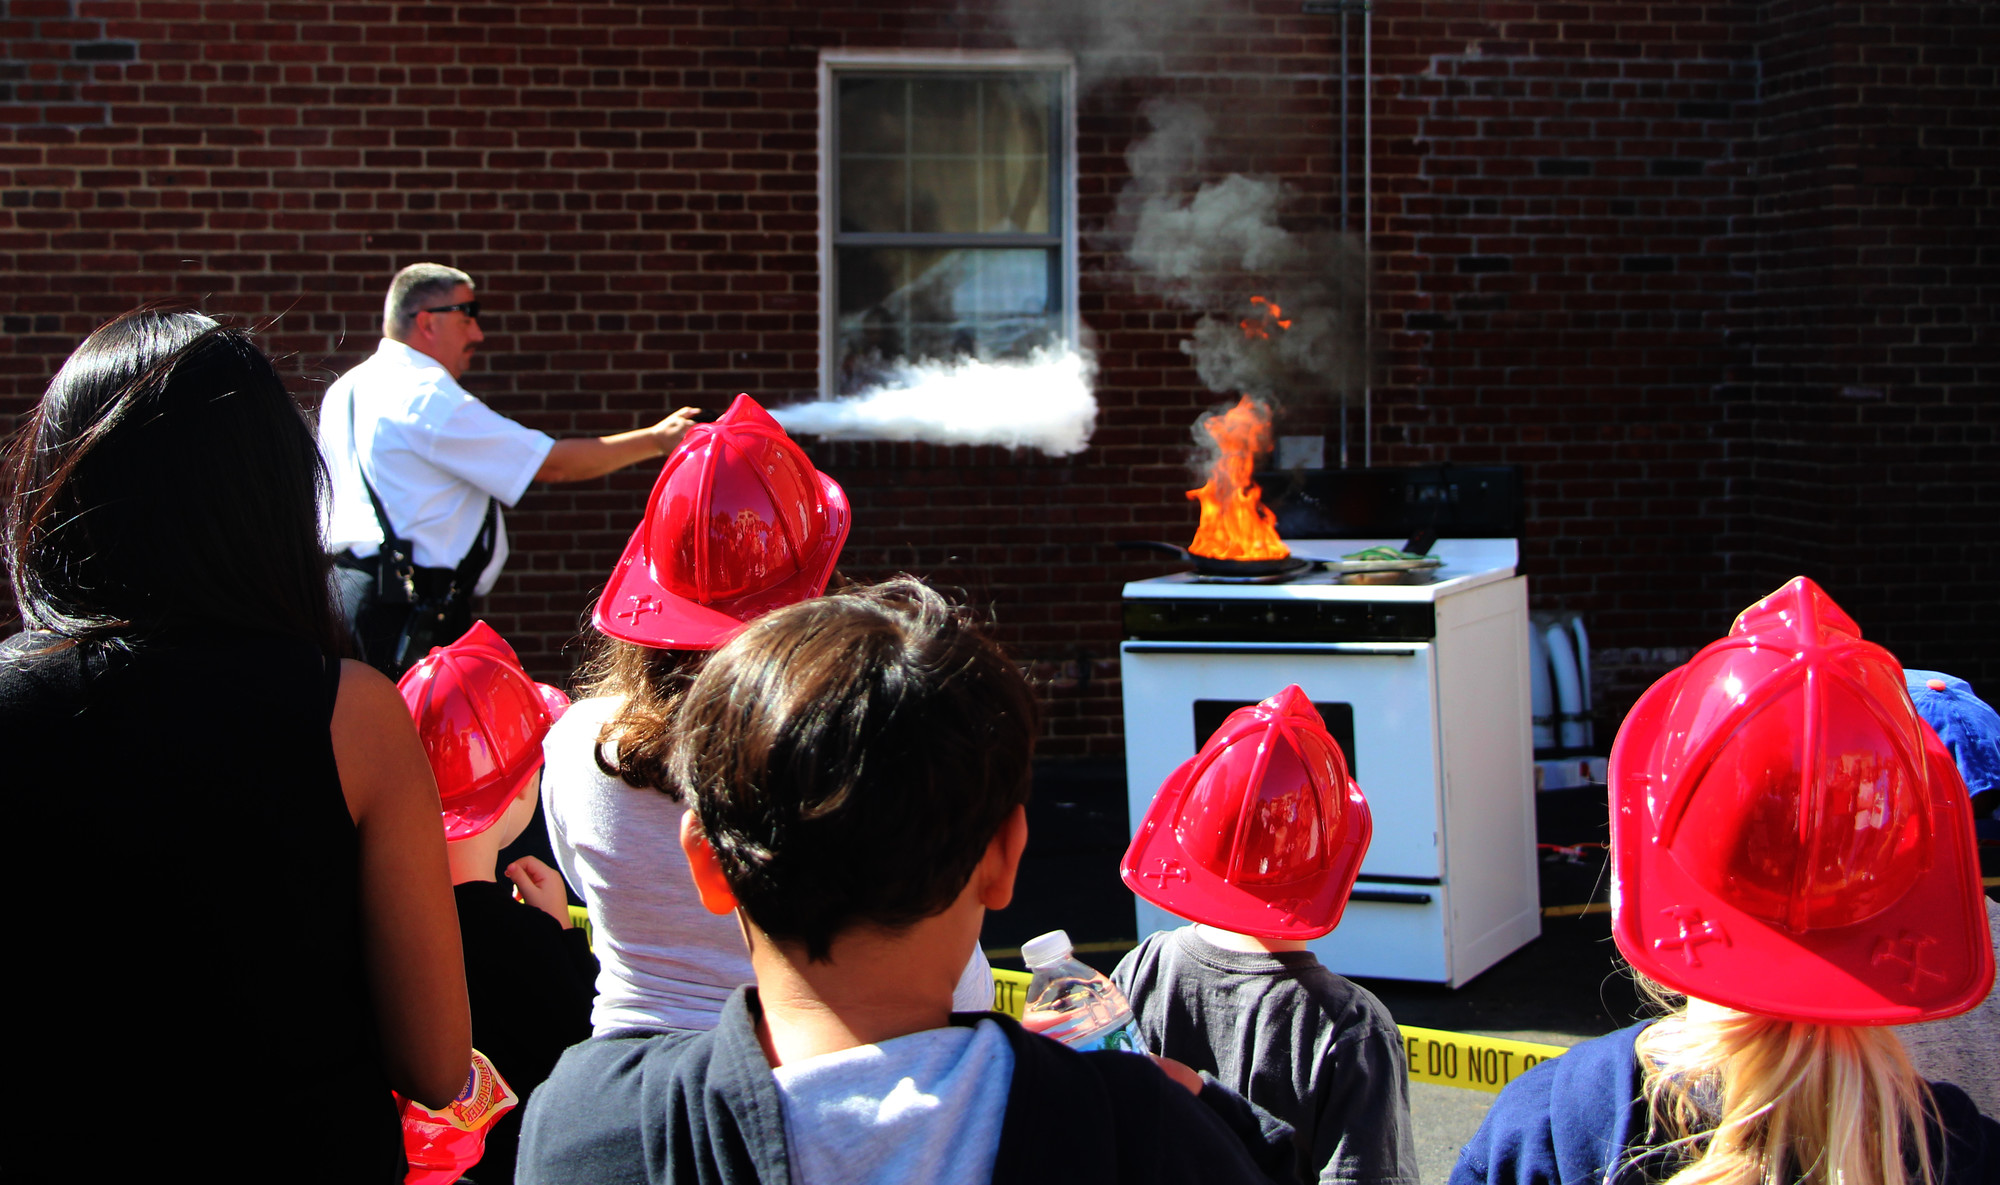 Kids and parents watched Chief James Kane demonstrate fire preventive techniques for the kitchen stove.